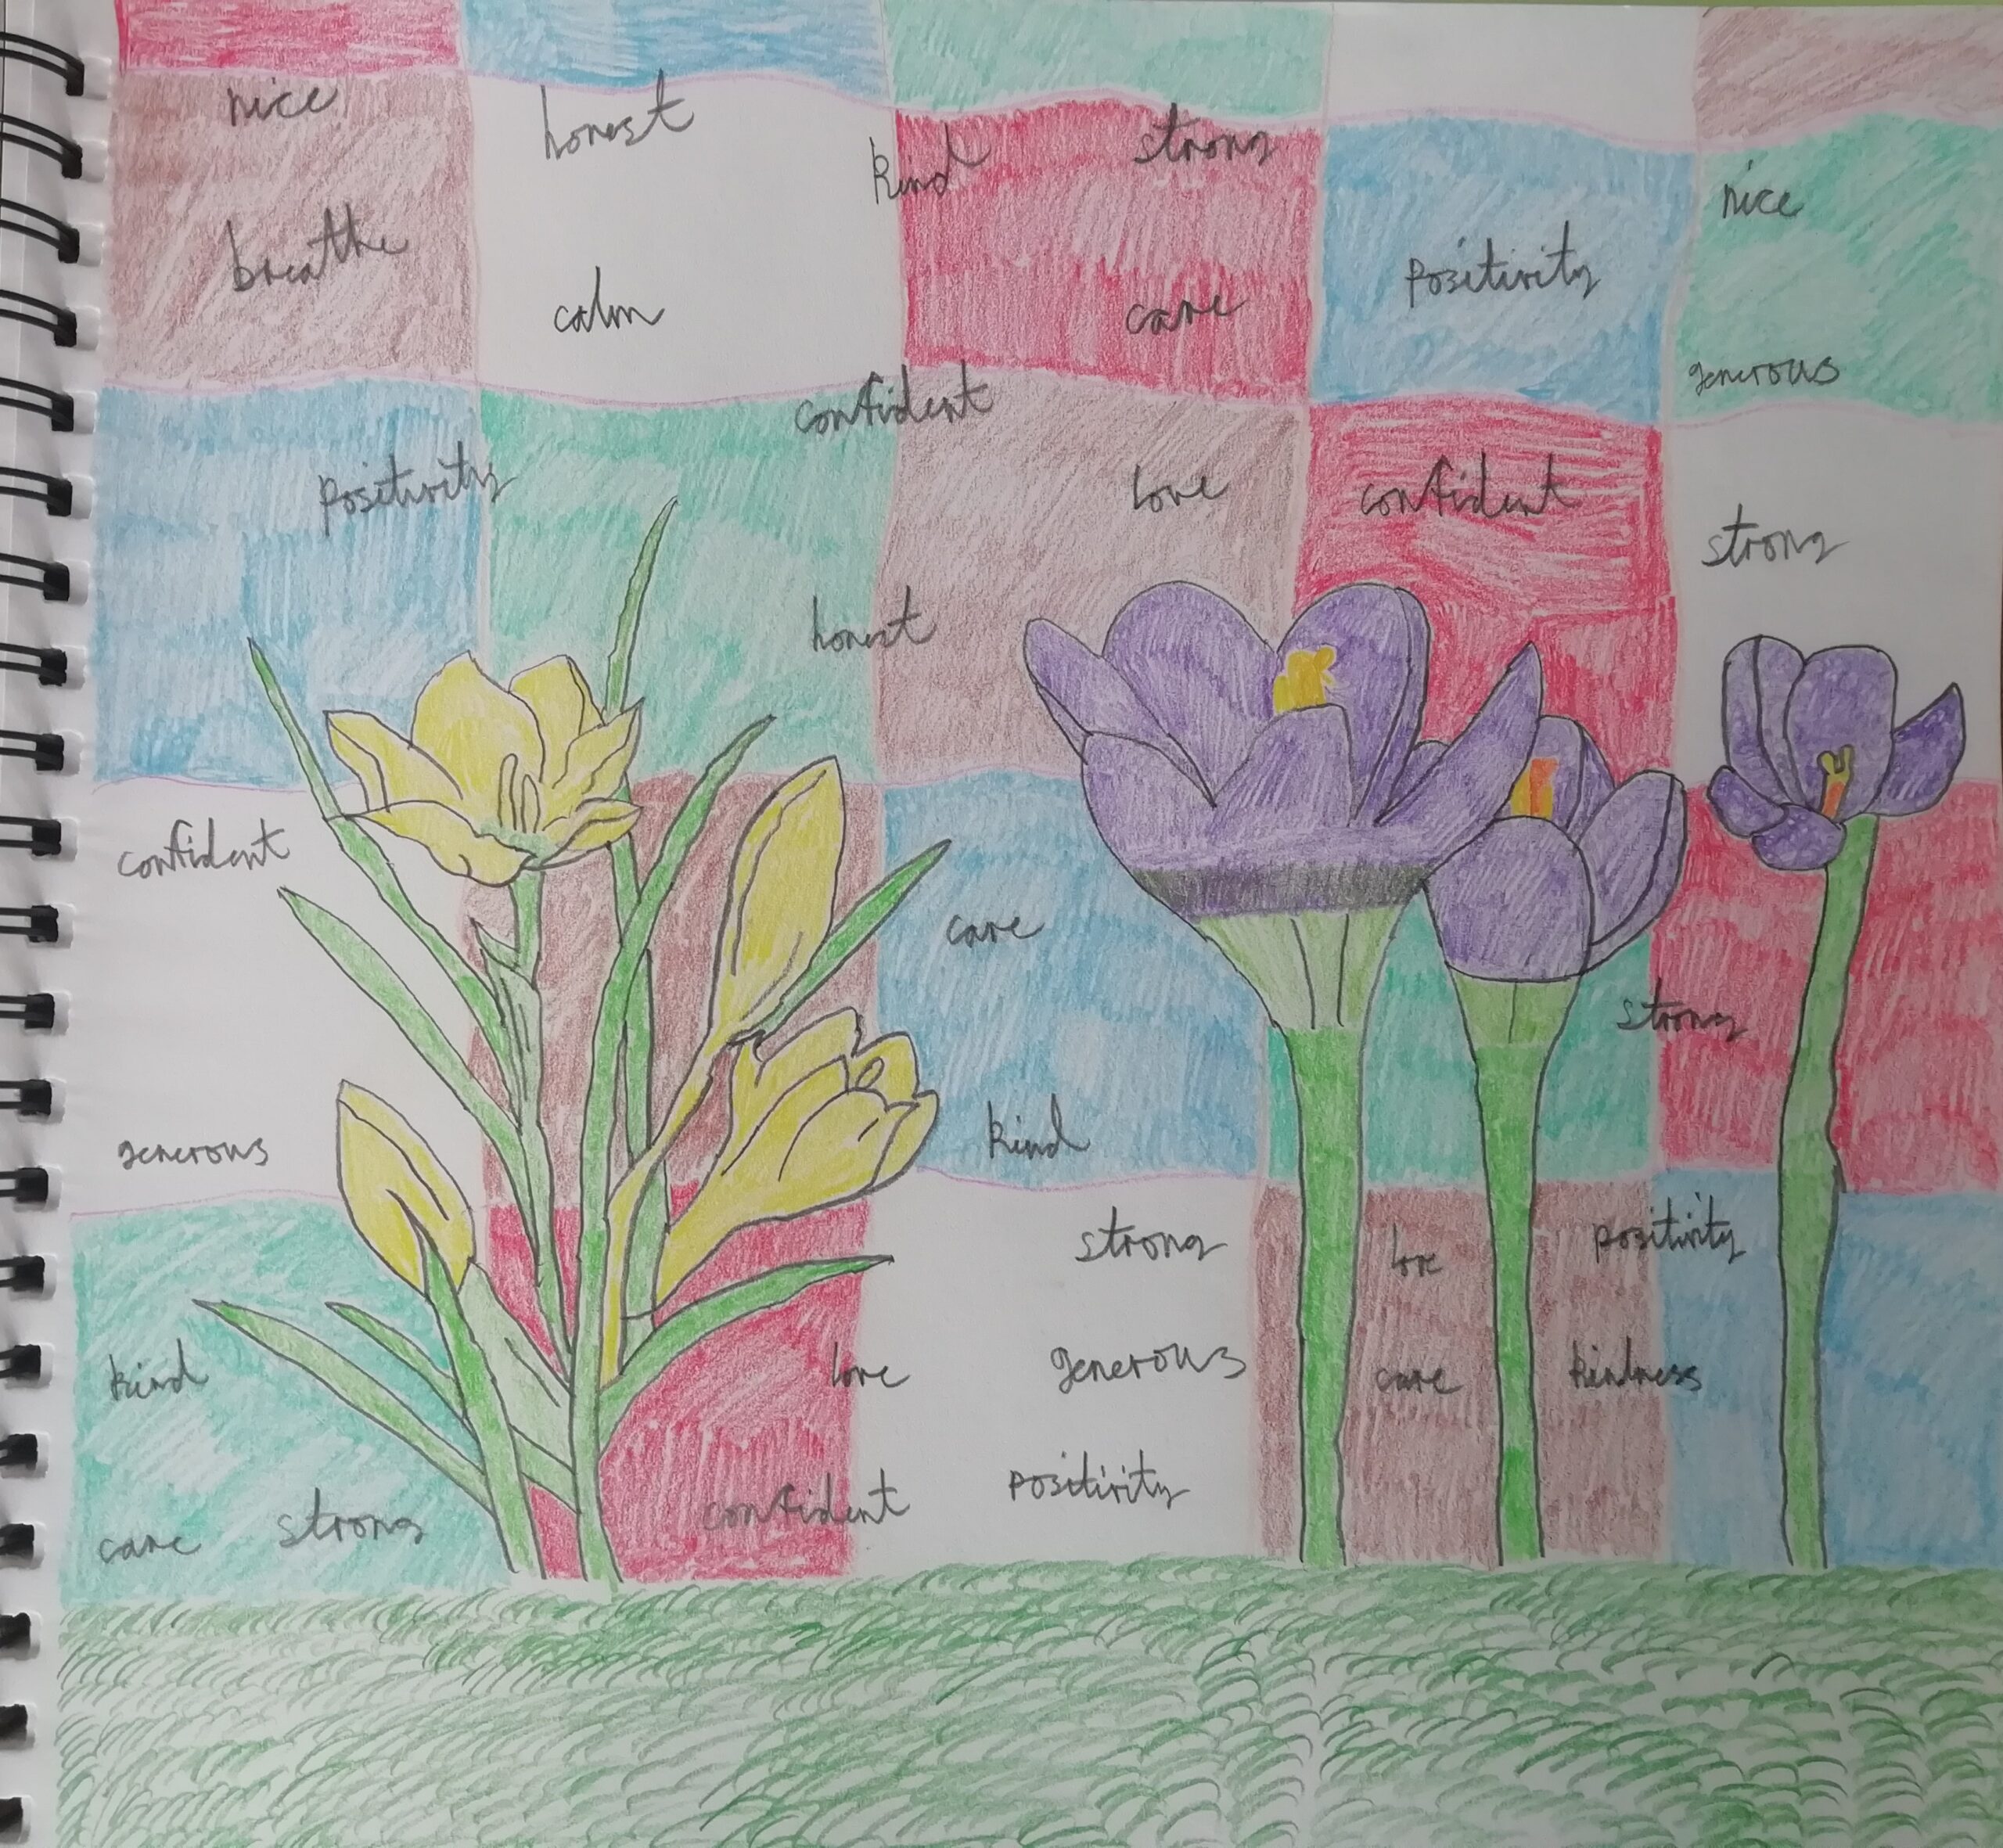 Coloured drawing of yellow crocuses and purple crocuses on background of coloured squares. Words appearing repeadetly and scattered around the backgrounds are nice, honest, kind, strong, breath, calm, confident, care, positivity, generous, love.